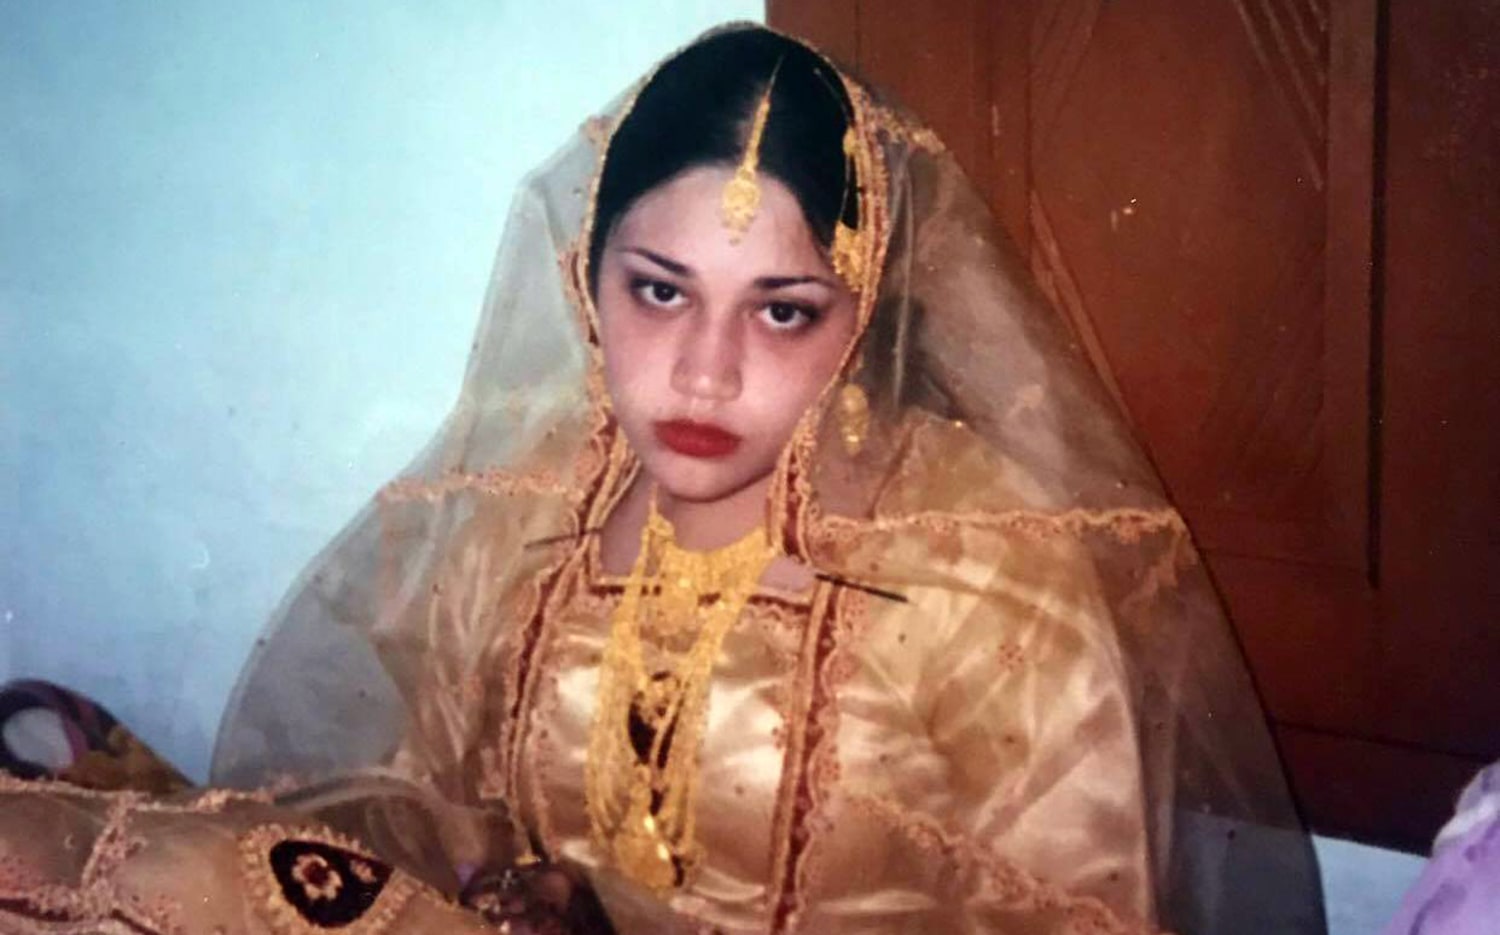 She was forced to wed at 13